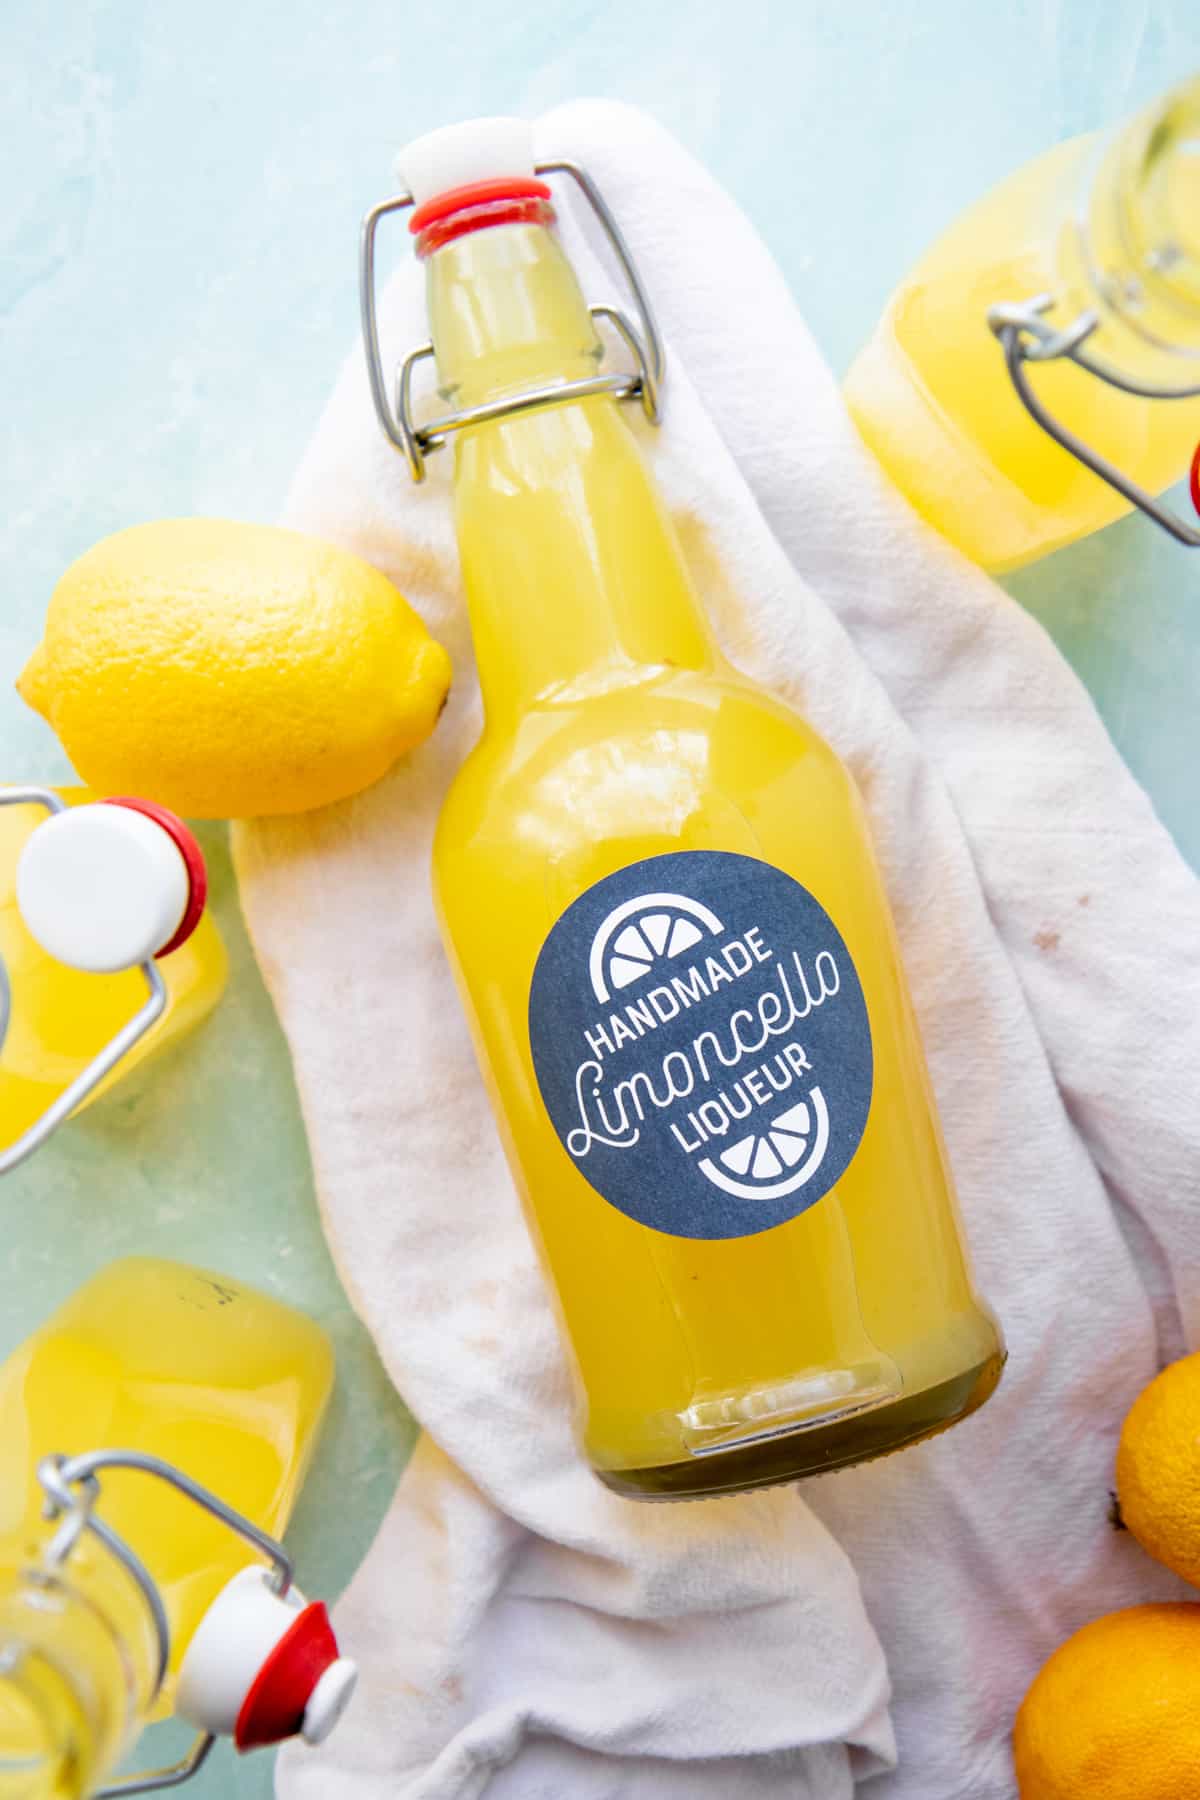 A full and labeled bottle of Homemade Limoncello lies on a white kitchen towel among lemons and other filled bottles.